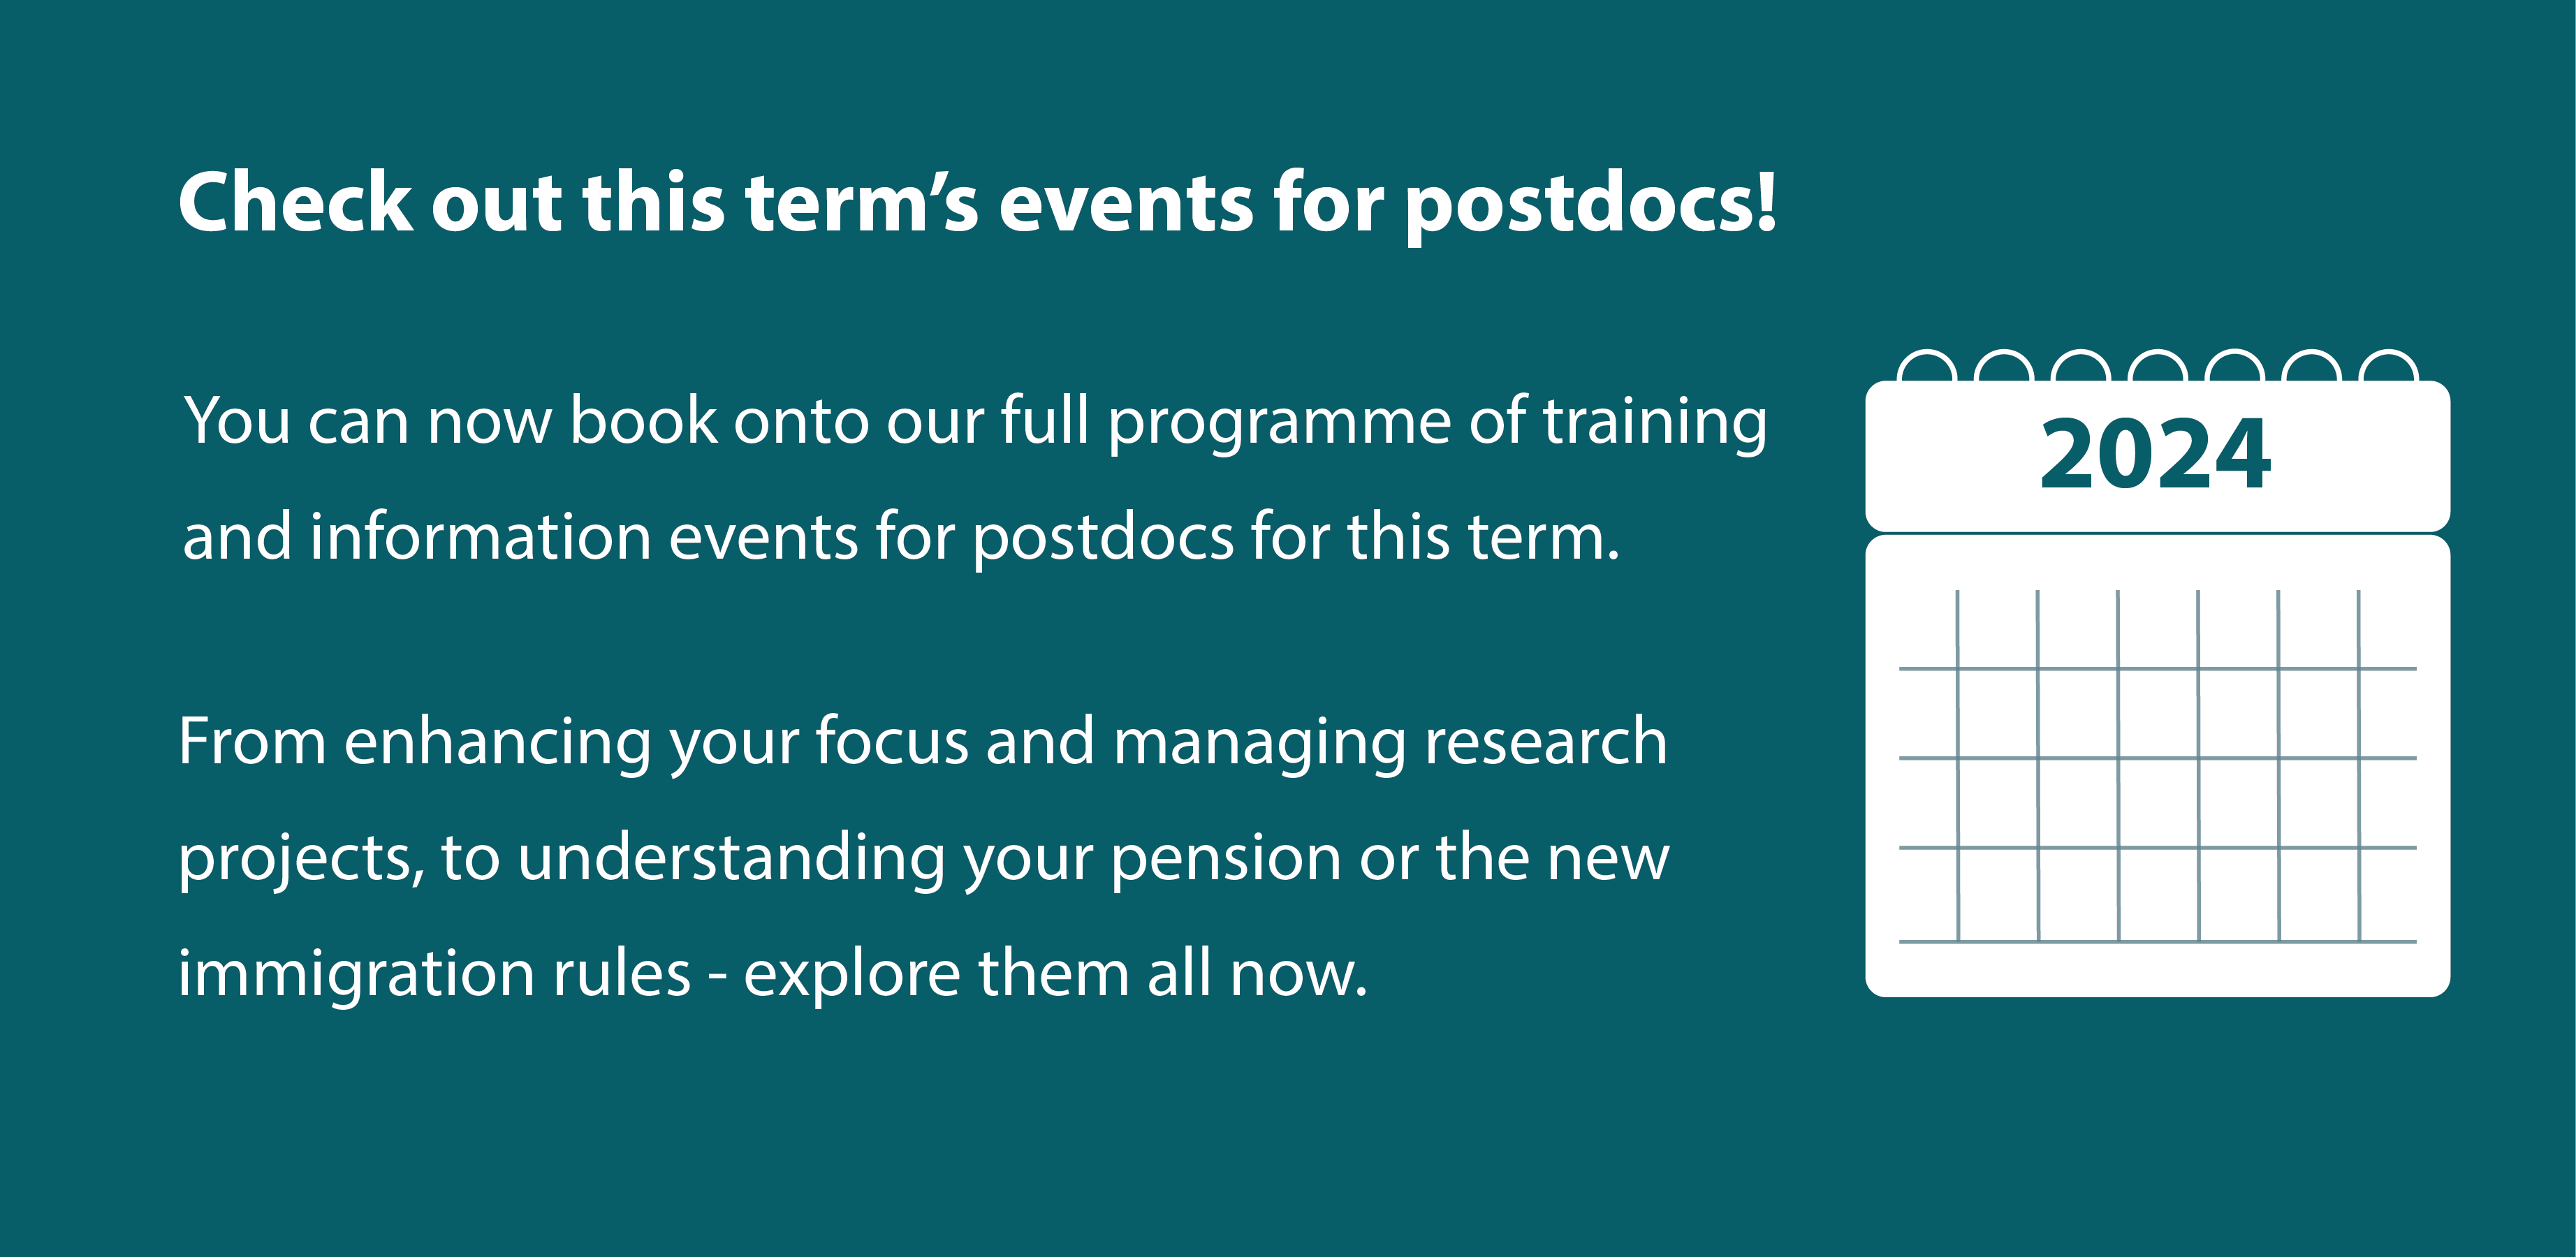 Check out this term's events for postdocs! You can now book onto our full programme of training and information events for this term. From enhancing your focus and managing research projects, to understanding your pension or the new immigration rules.